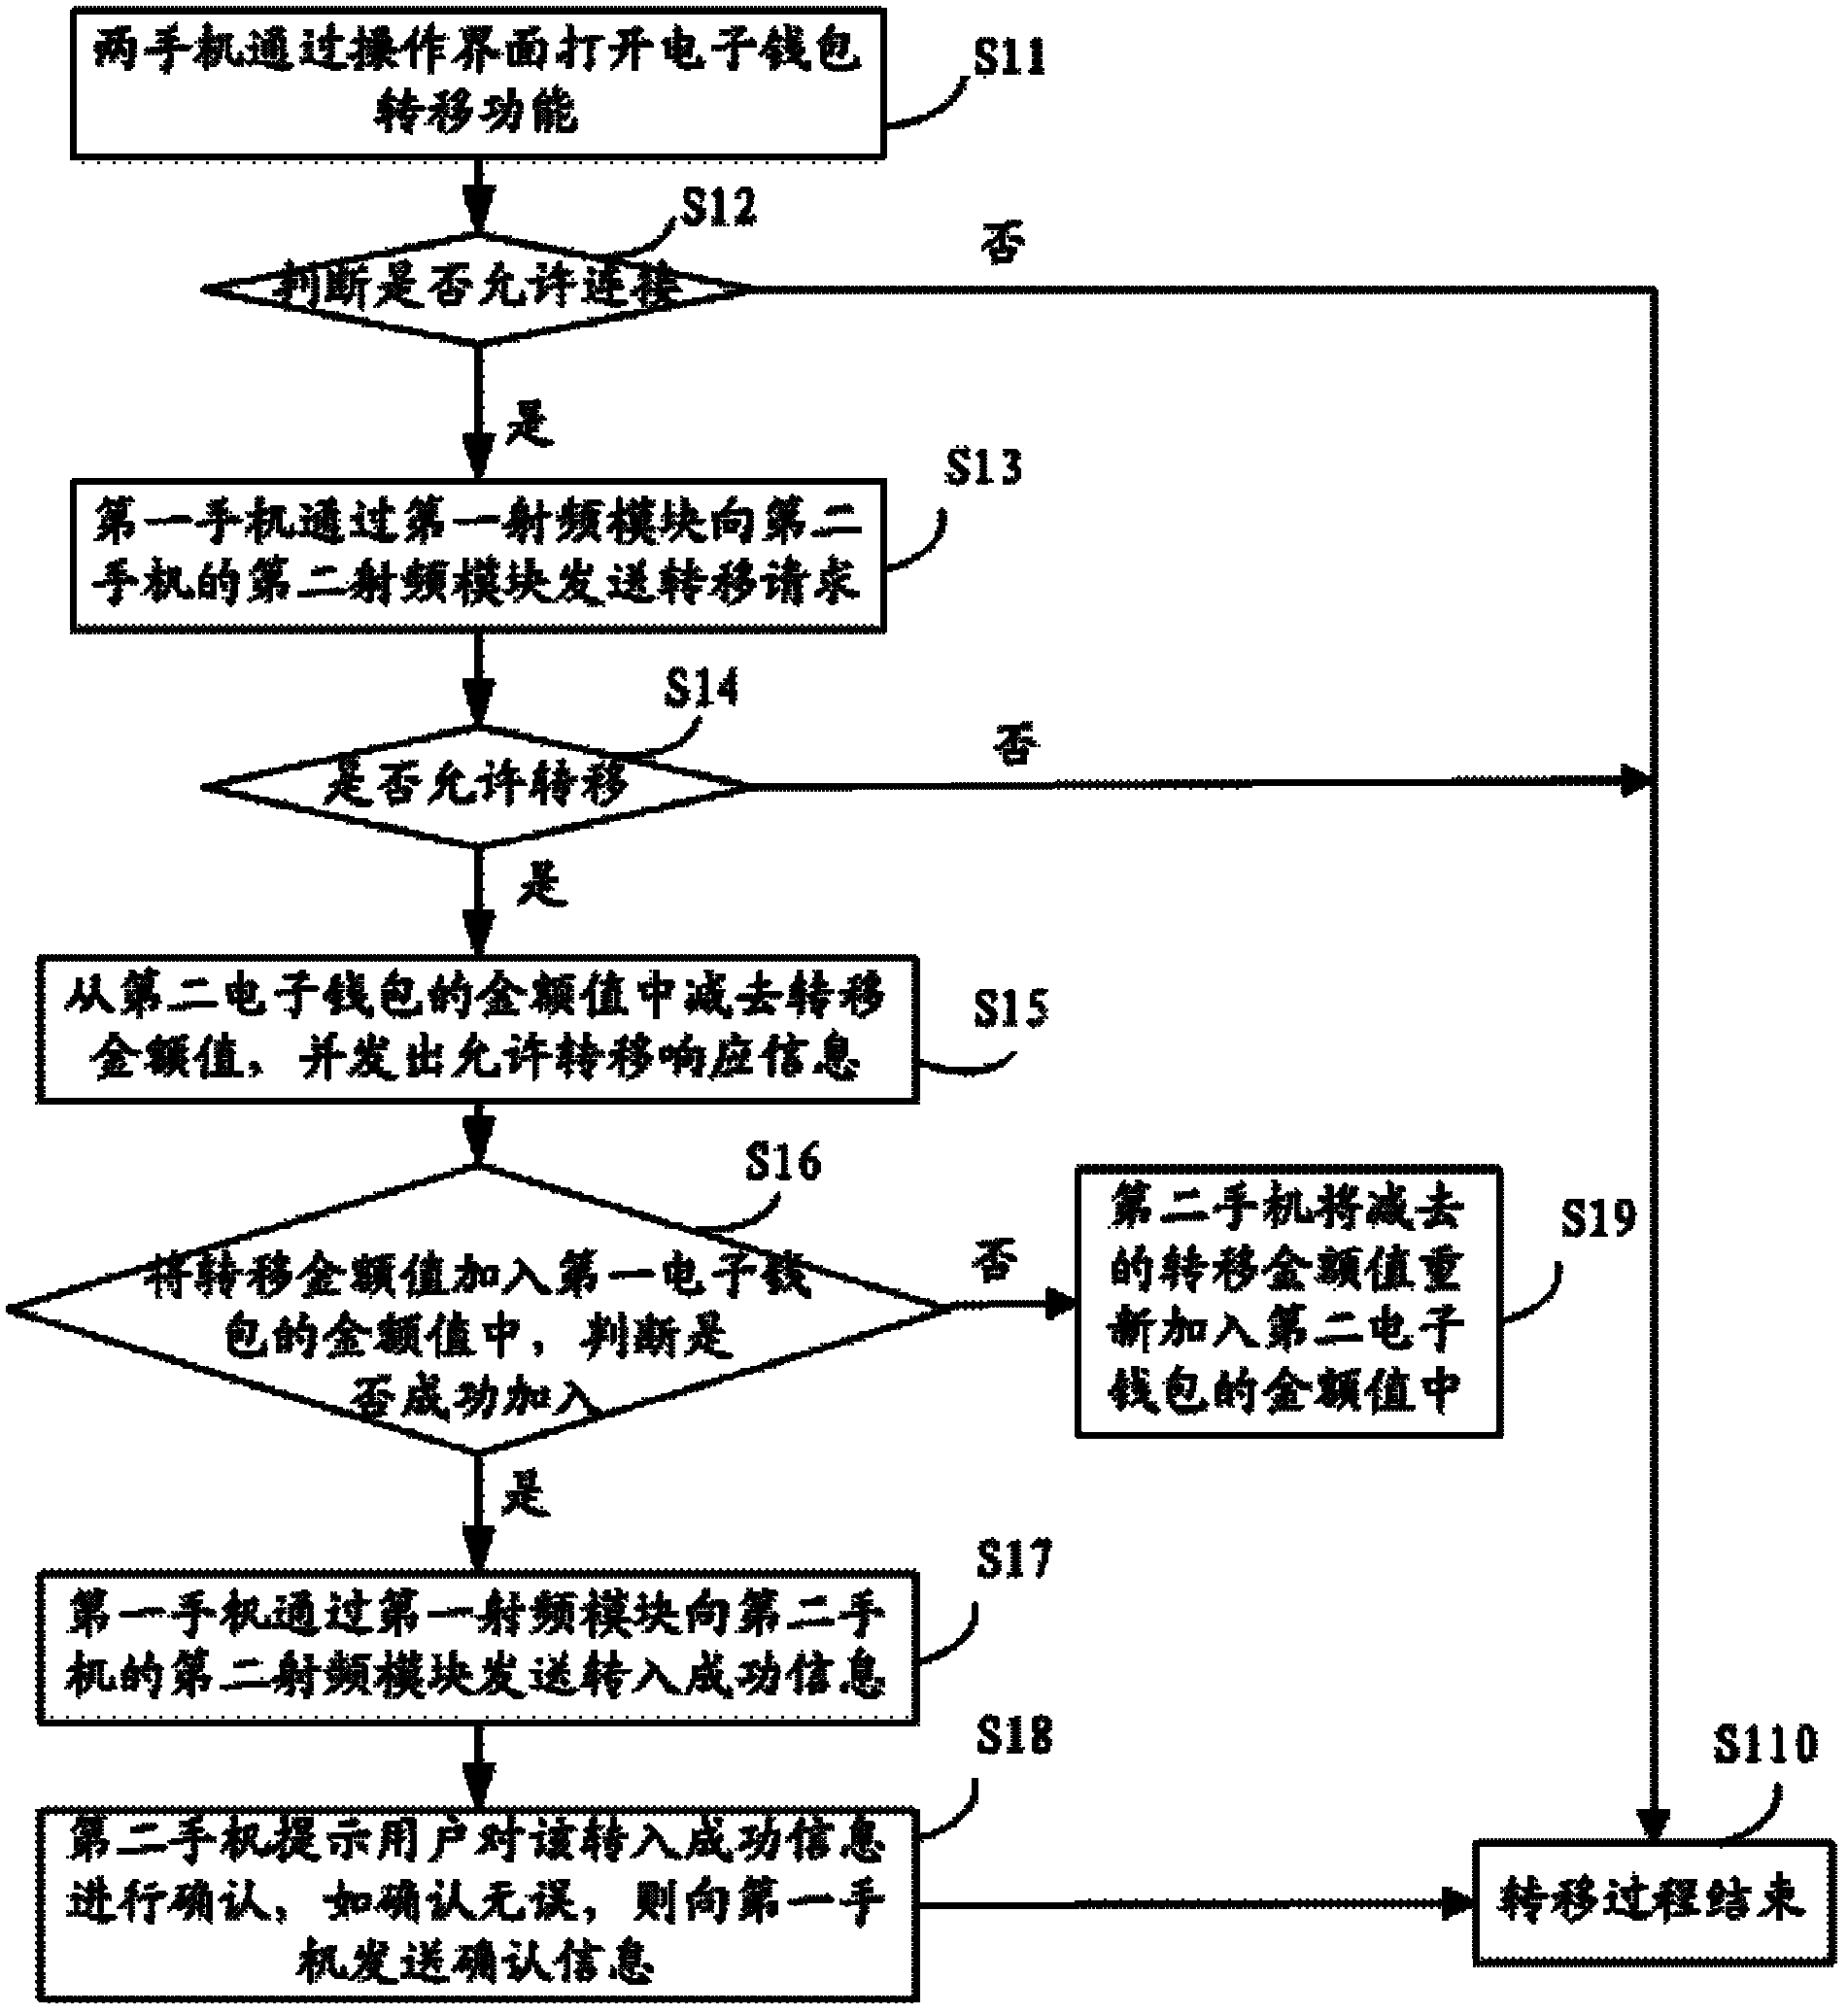 Method and system for transferring money value among electronic wallets